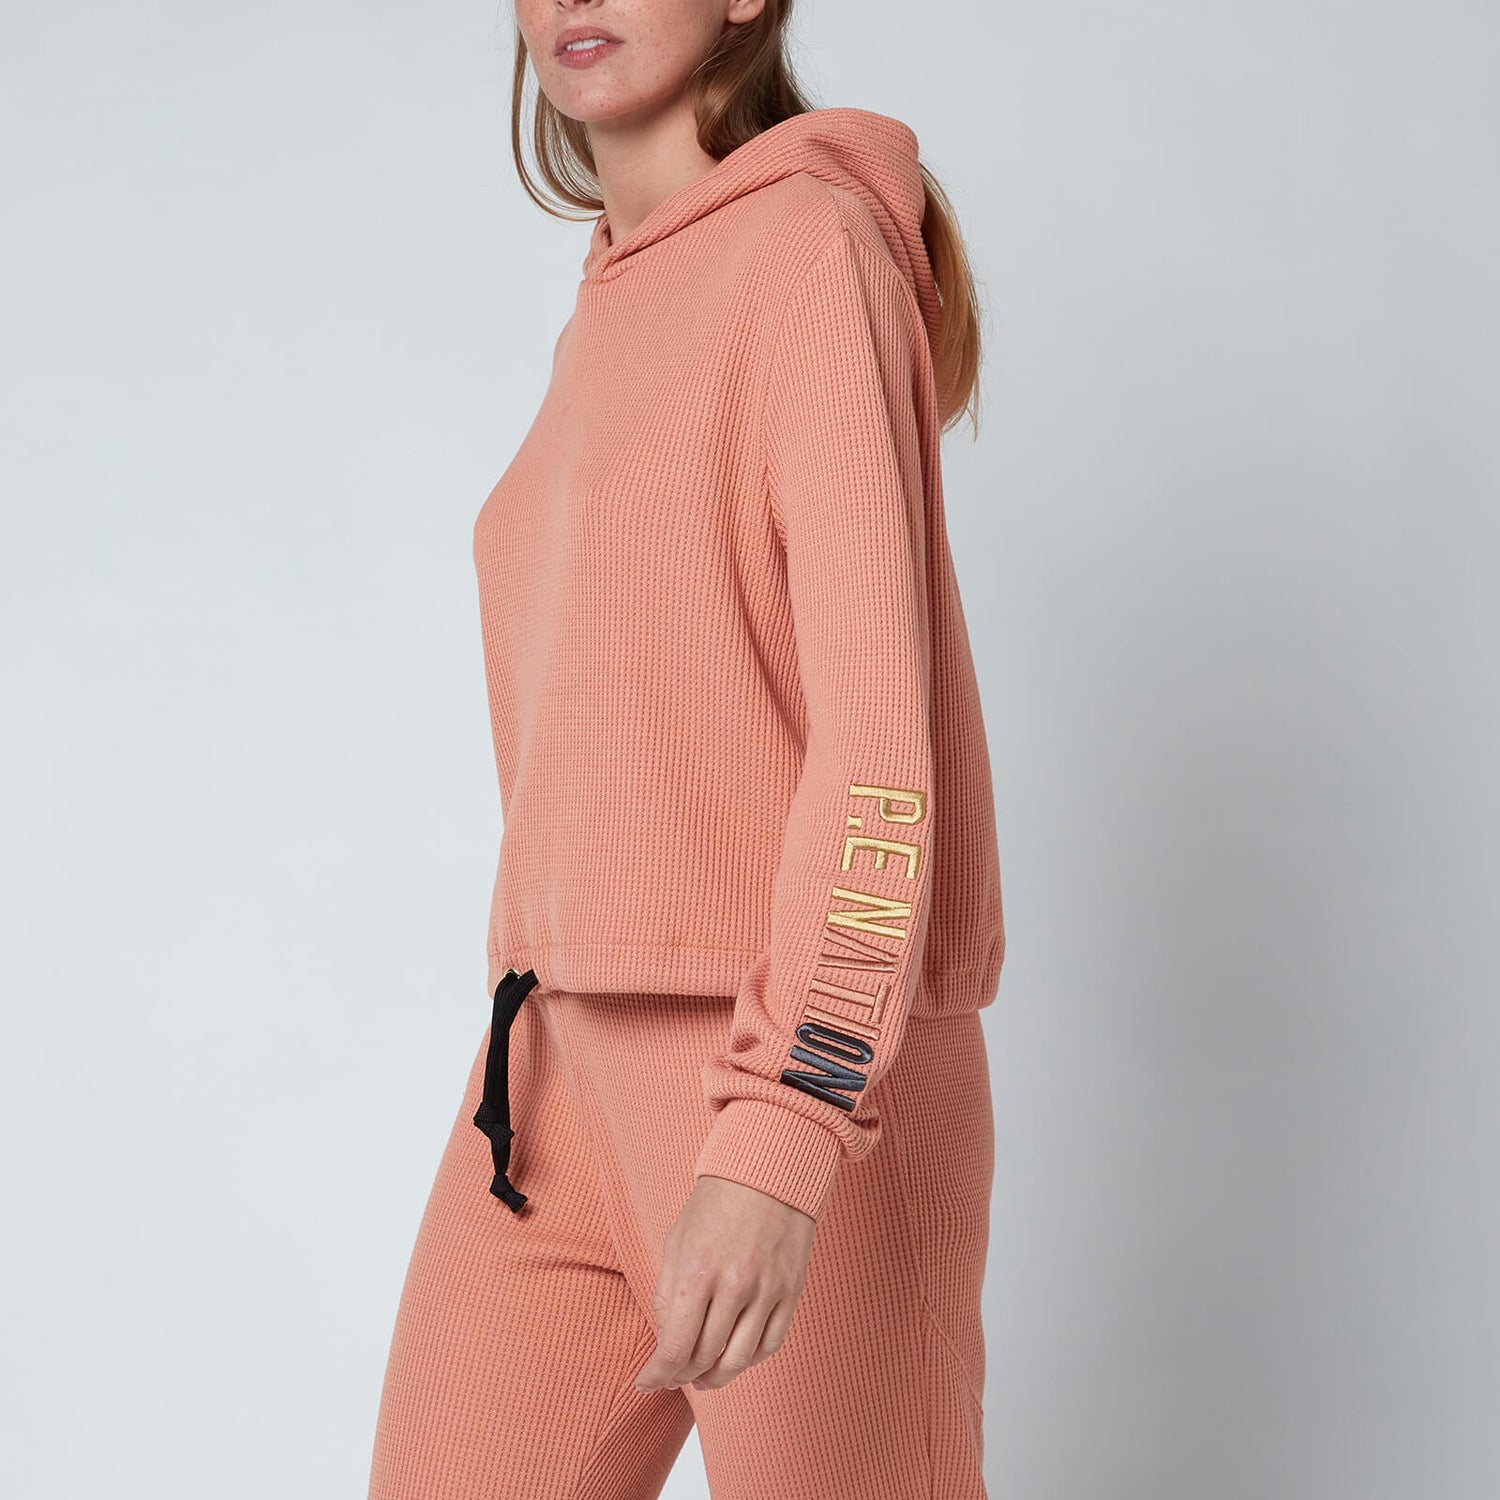 P.E Nation Women's Rebound Hoodie - Coral Mid Crom - XS